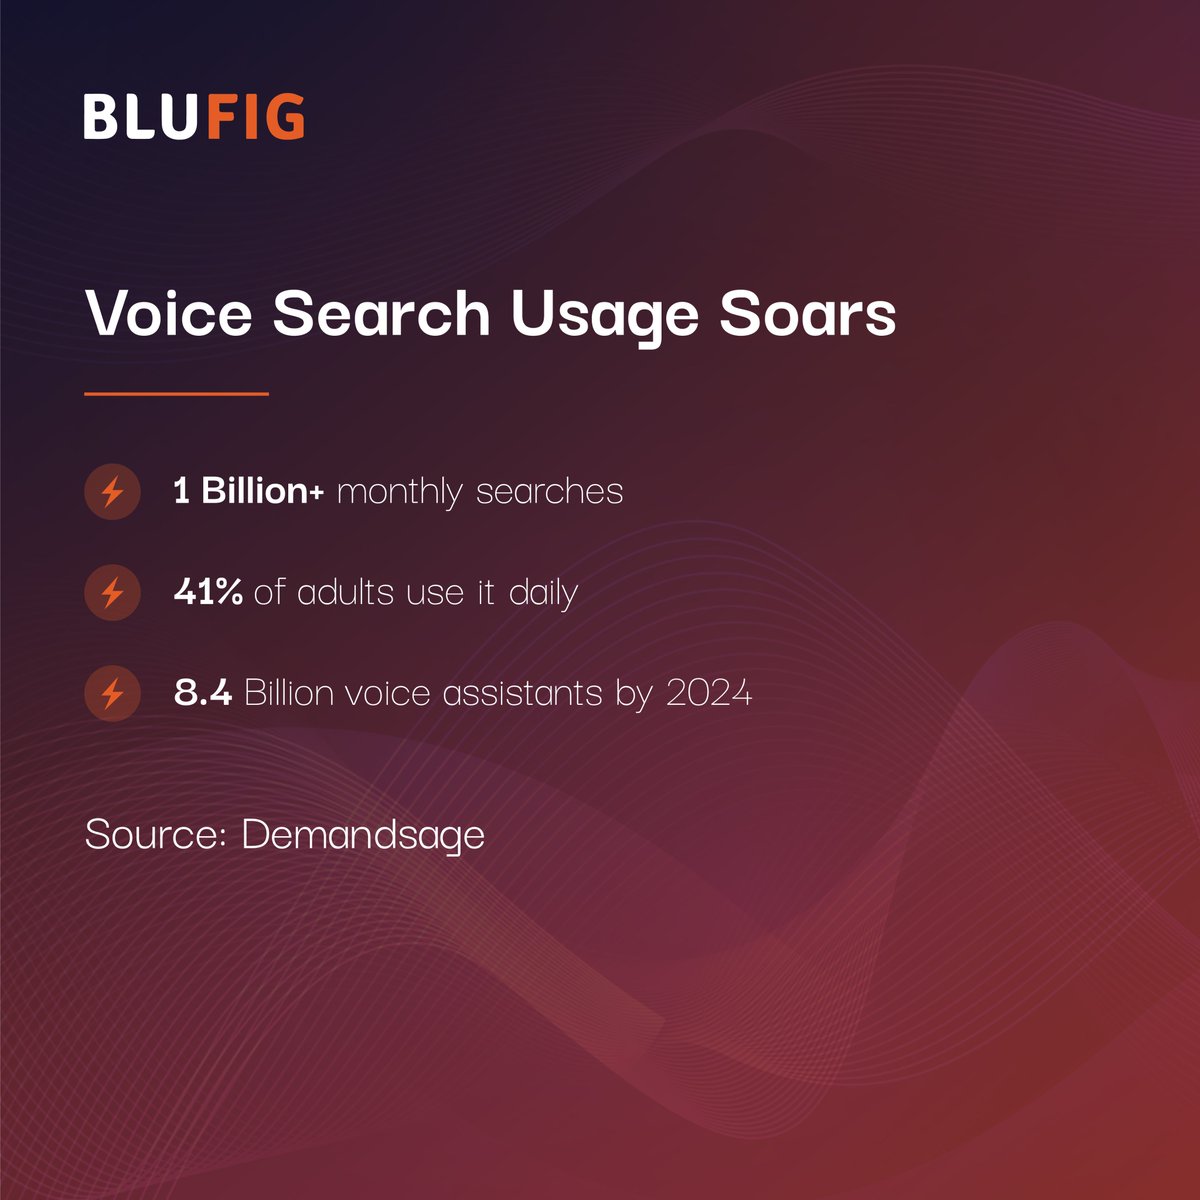 We are witnessing a staggering 50% of online searches being conducted by voice. Optimizee your content for voice search and ensure your brand resonates in every ‘Hey Siri’ and ‘Okay Google’ moment.
#VoiceSearch #HeySiri #OkayGoogle #VoiceAssistants #Technology #TeamBlufig